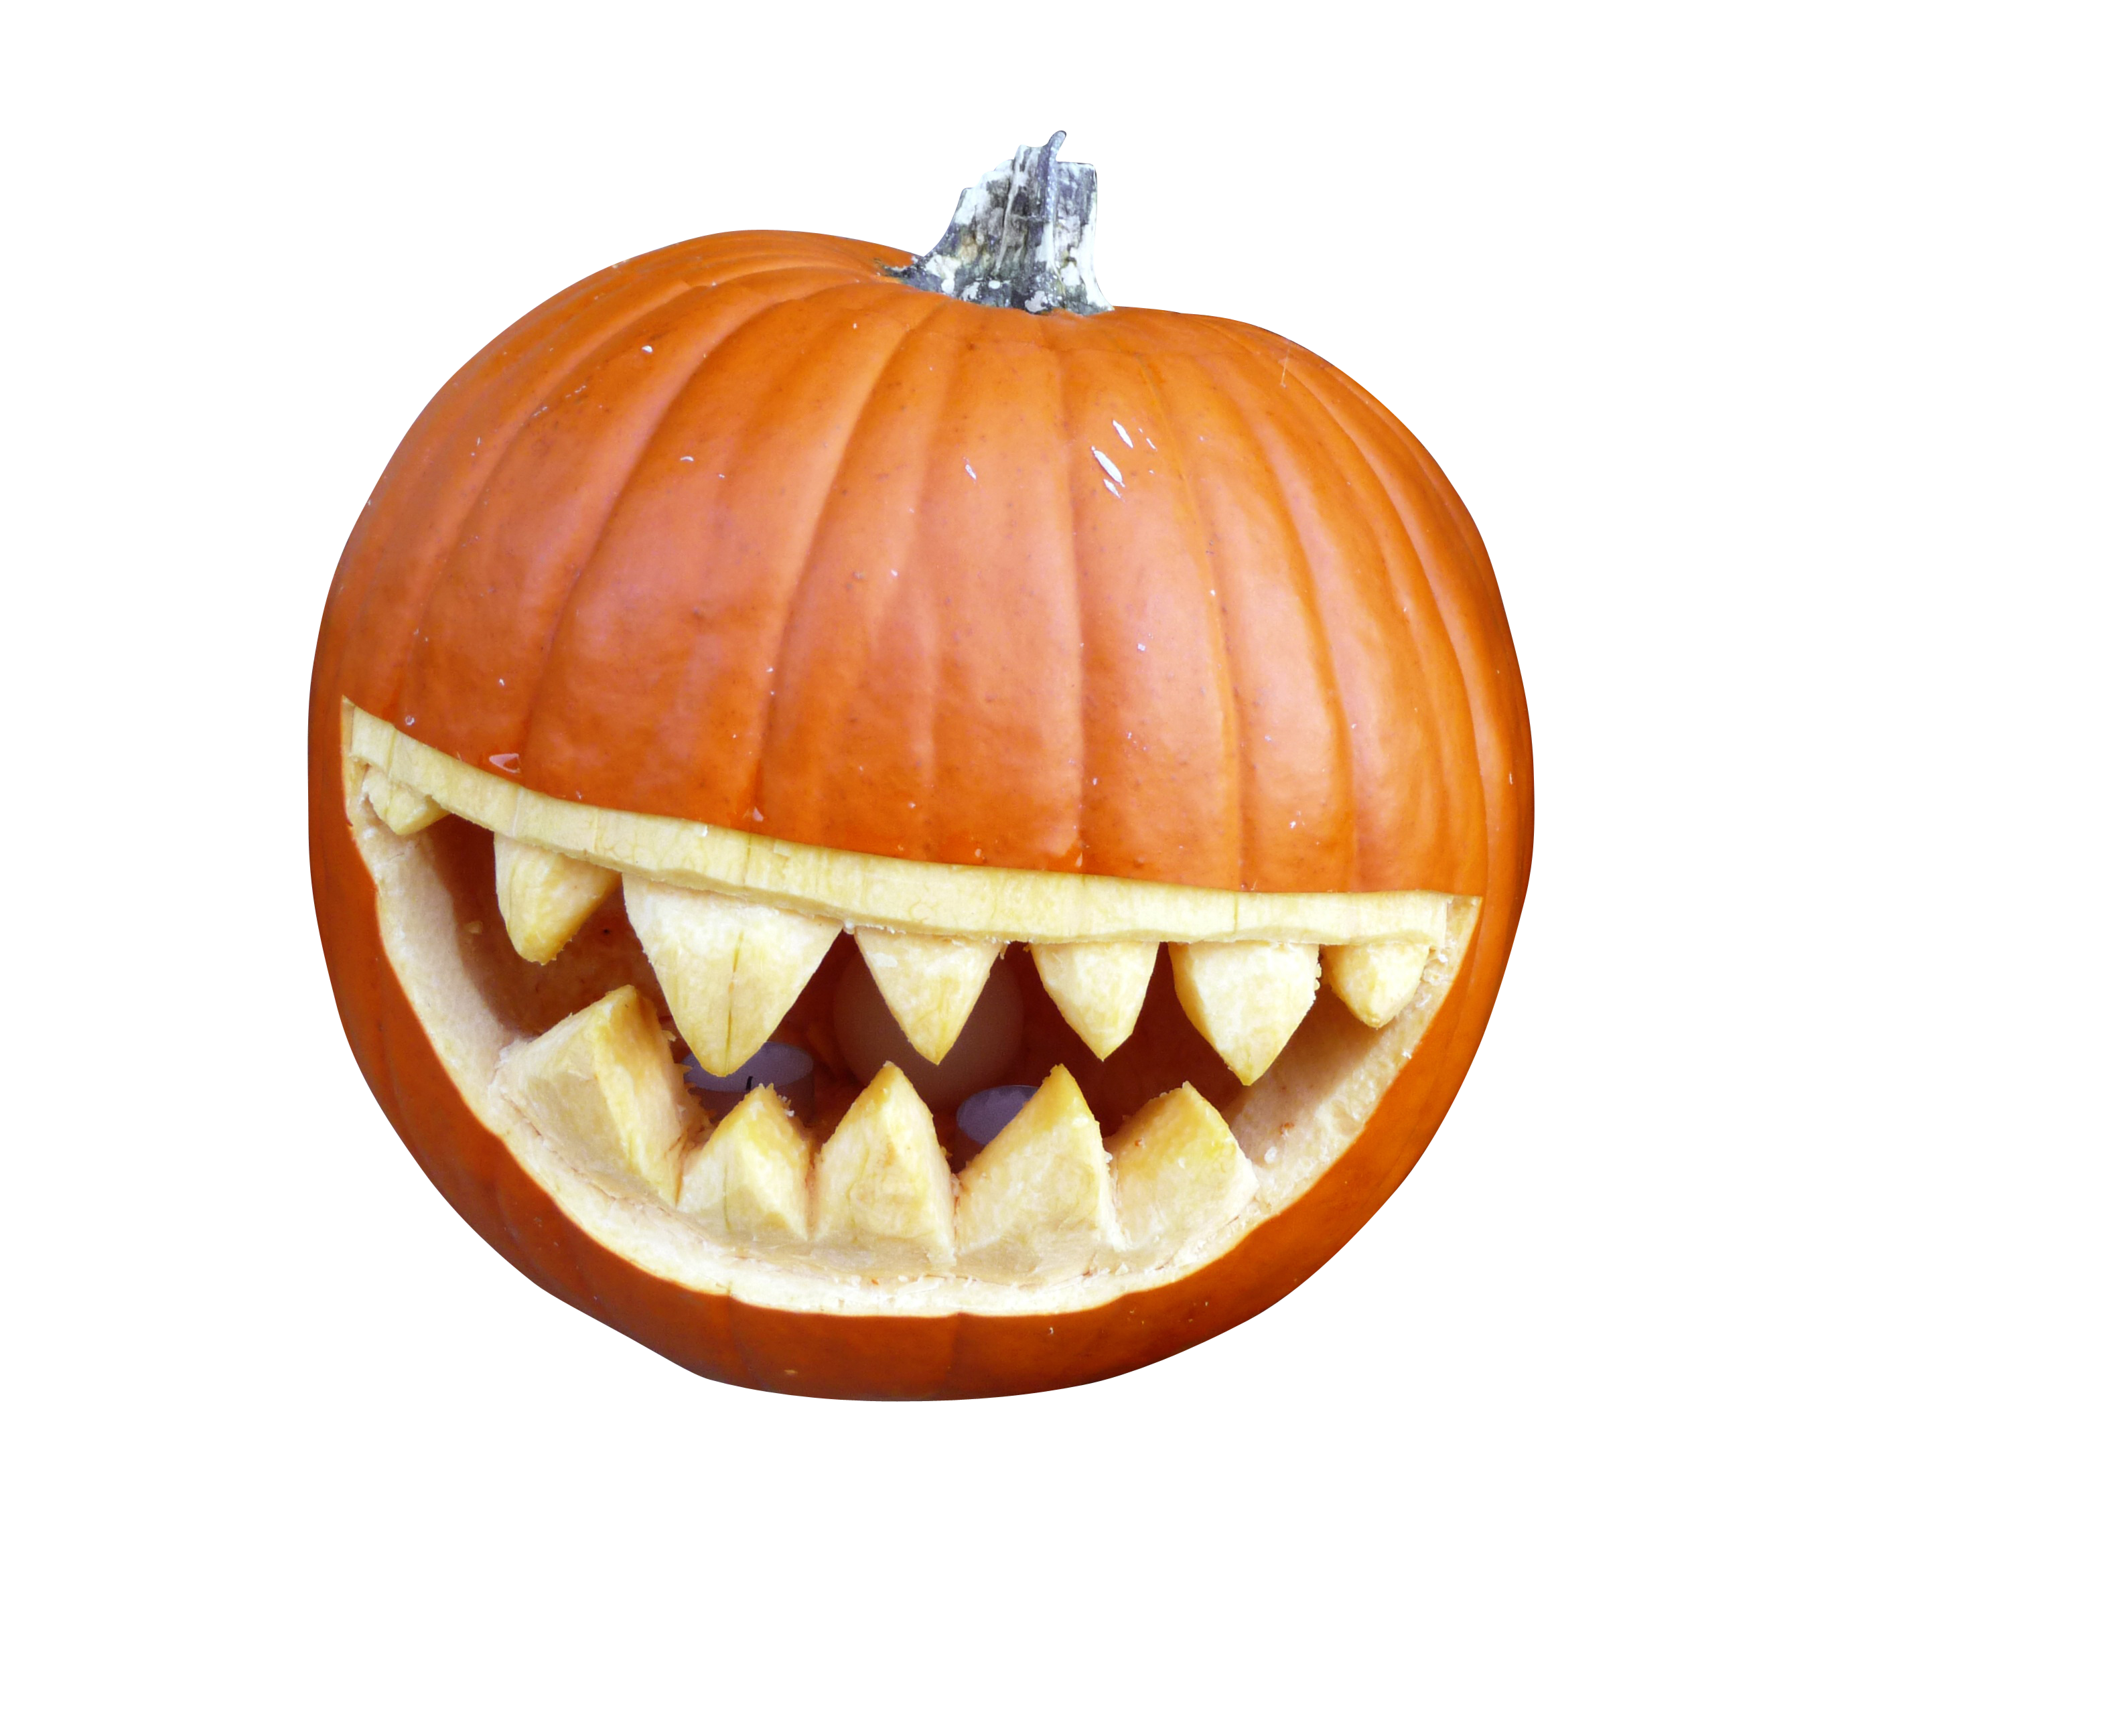 A Carved Pumpkin With Teeth